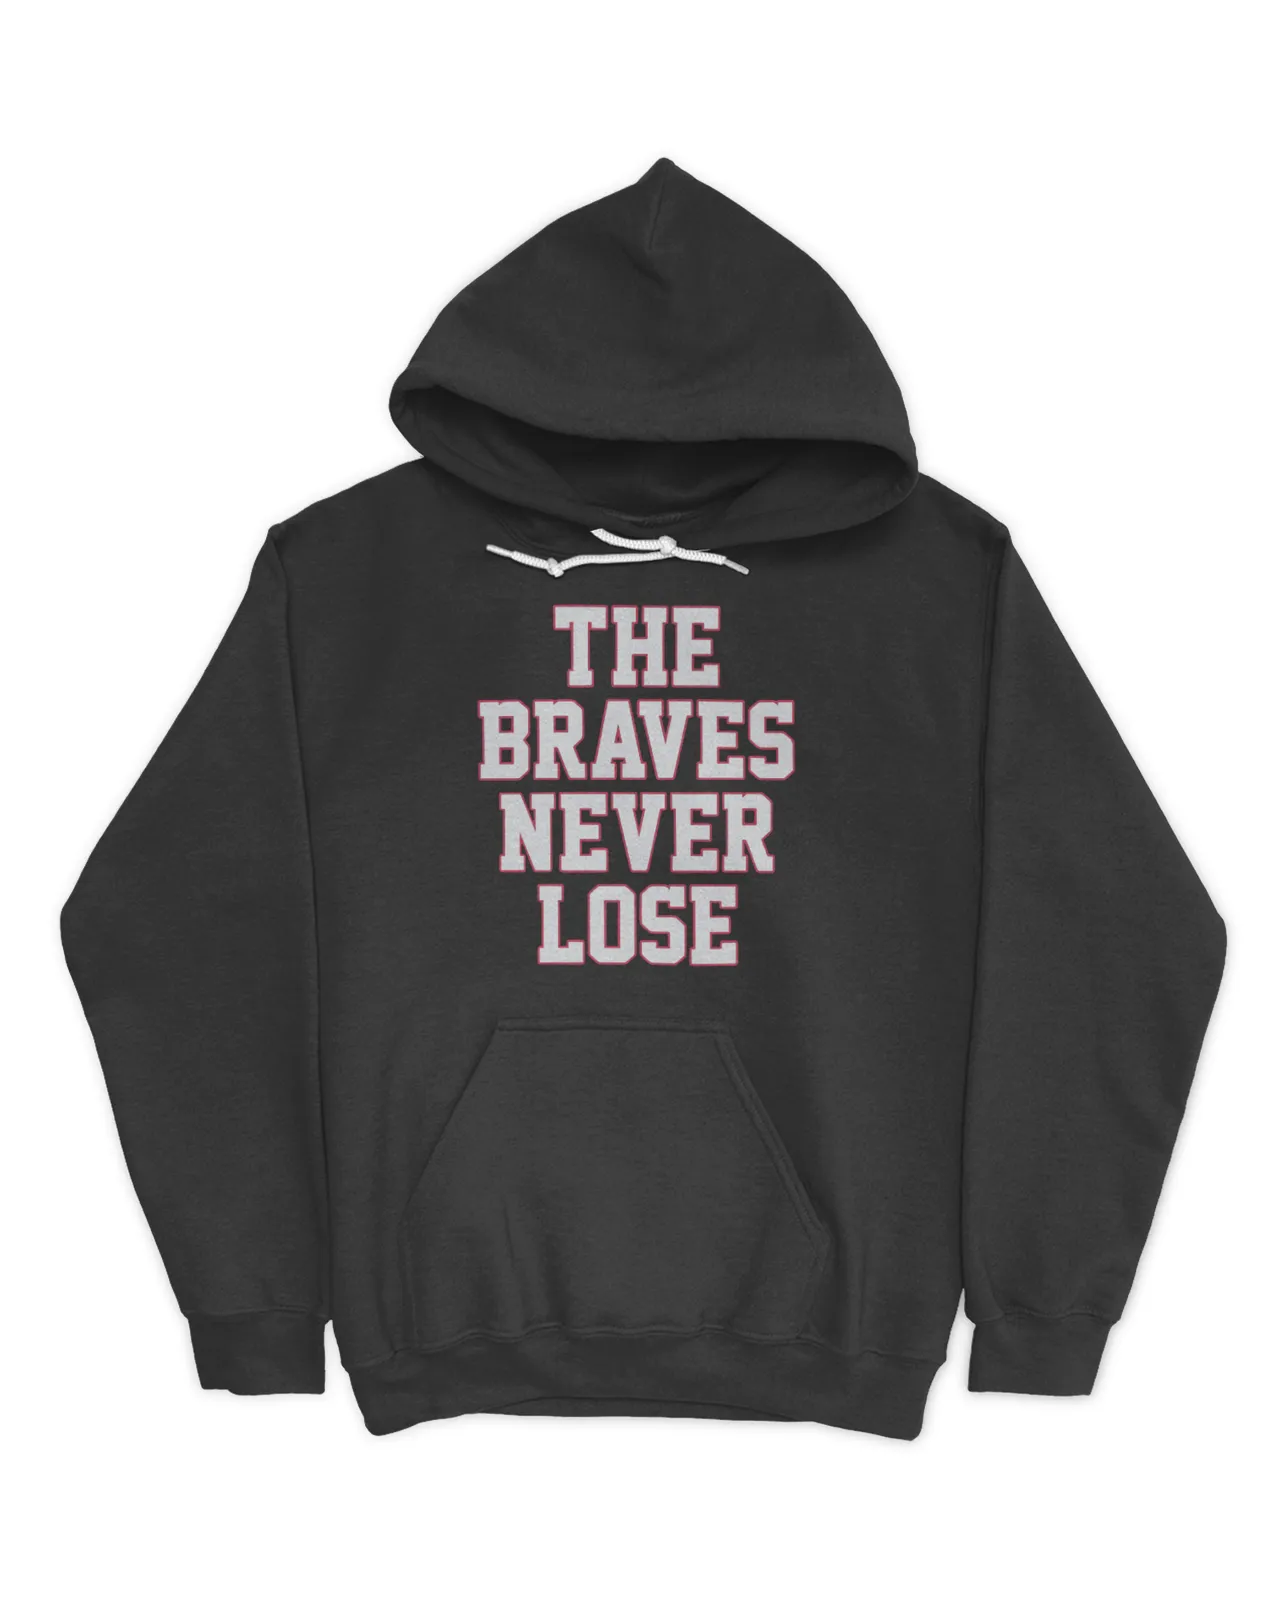 The Braves Never Lose Shirt